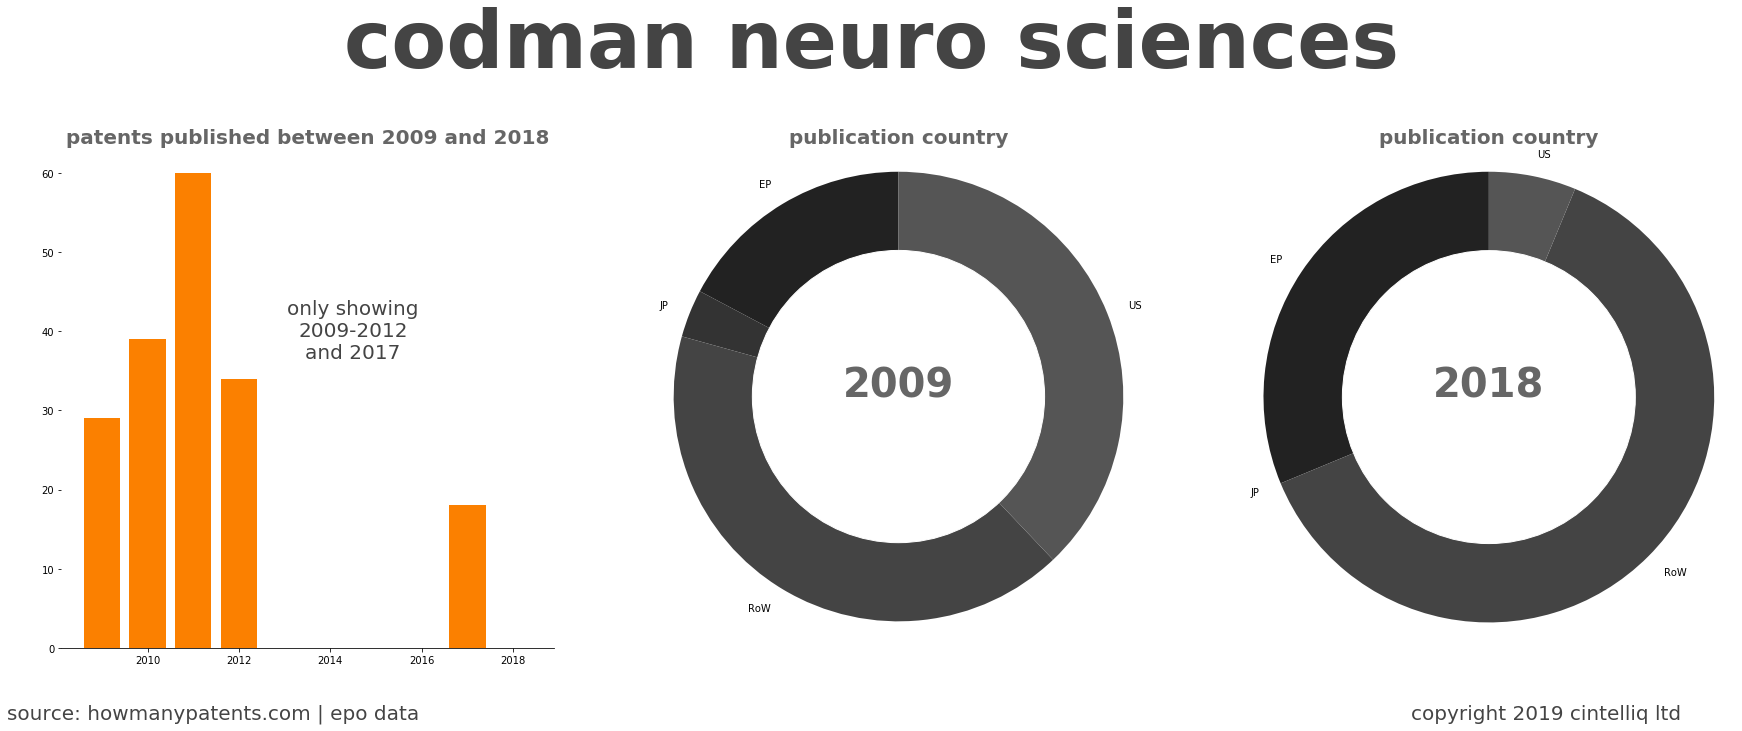 summary of patents for Codman Neuro Sciences